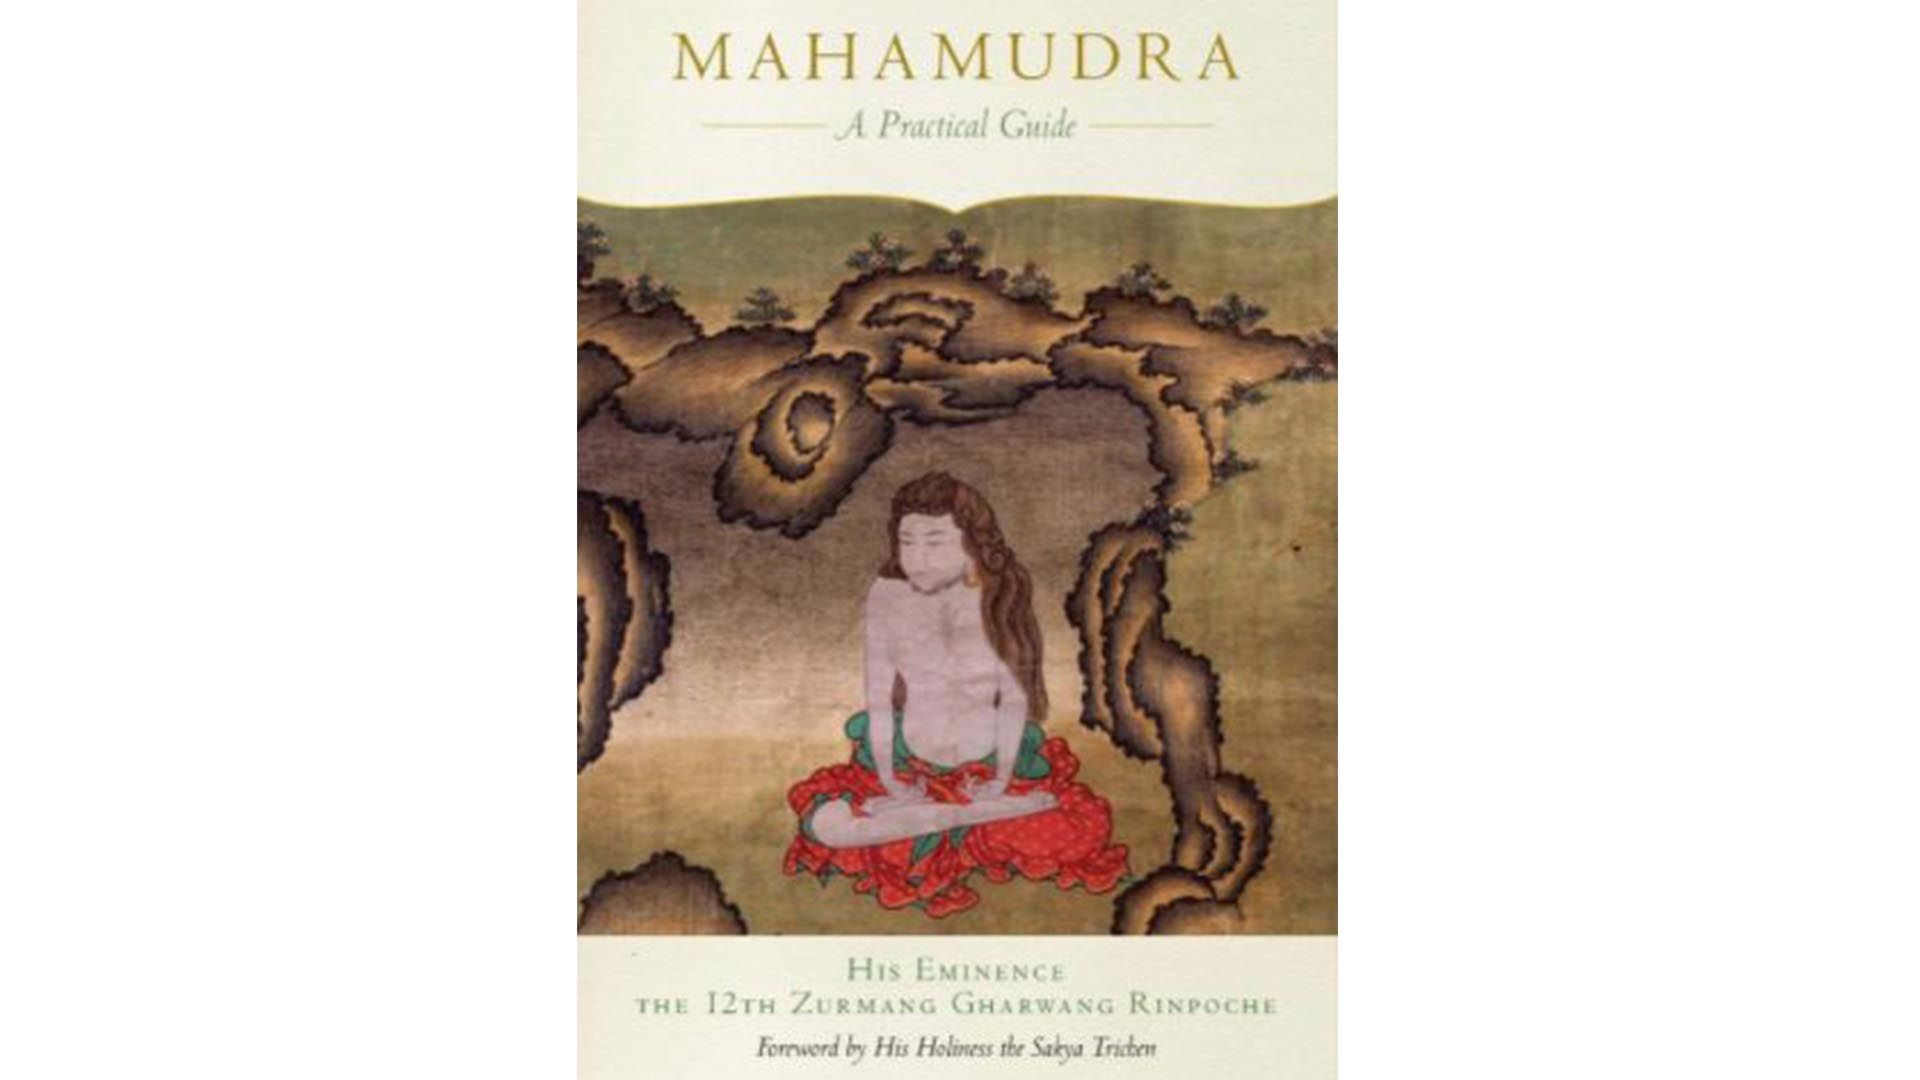 Pre-Order your “Mahamudra: A Practical Guide”